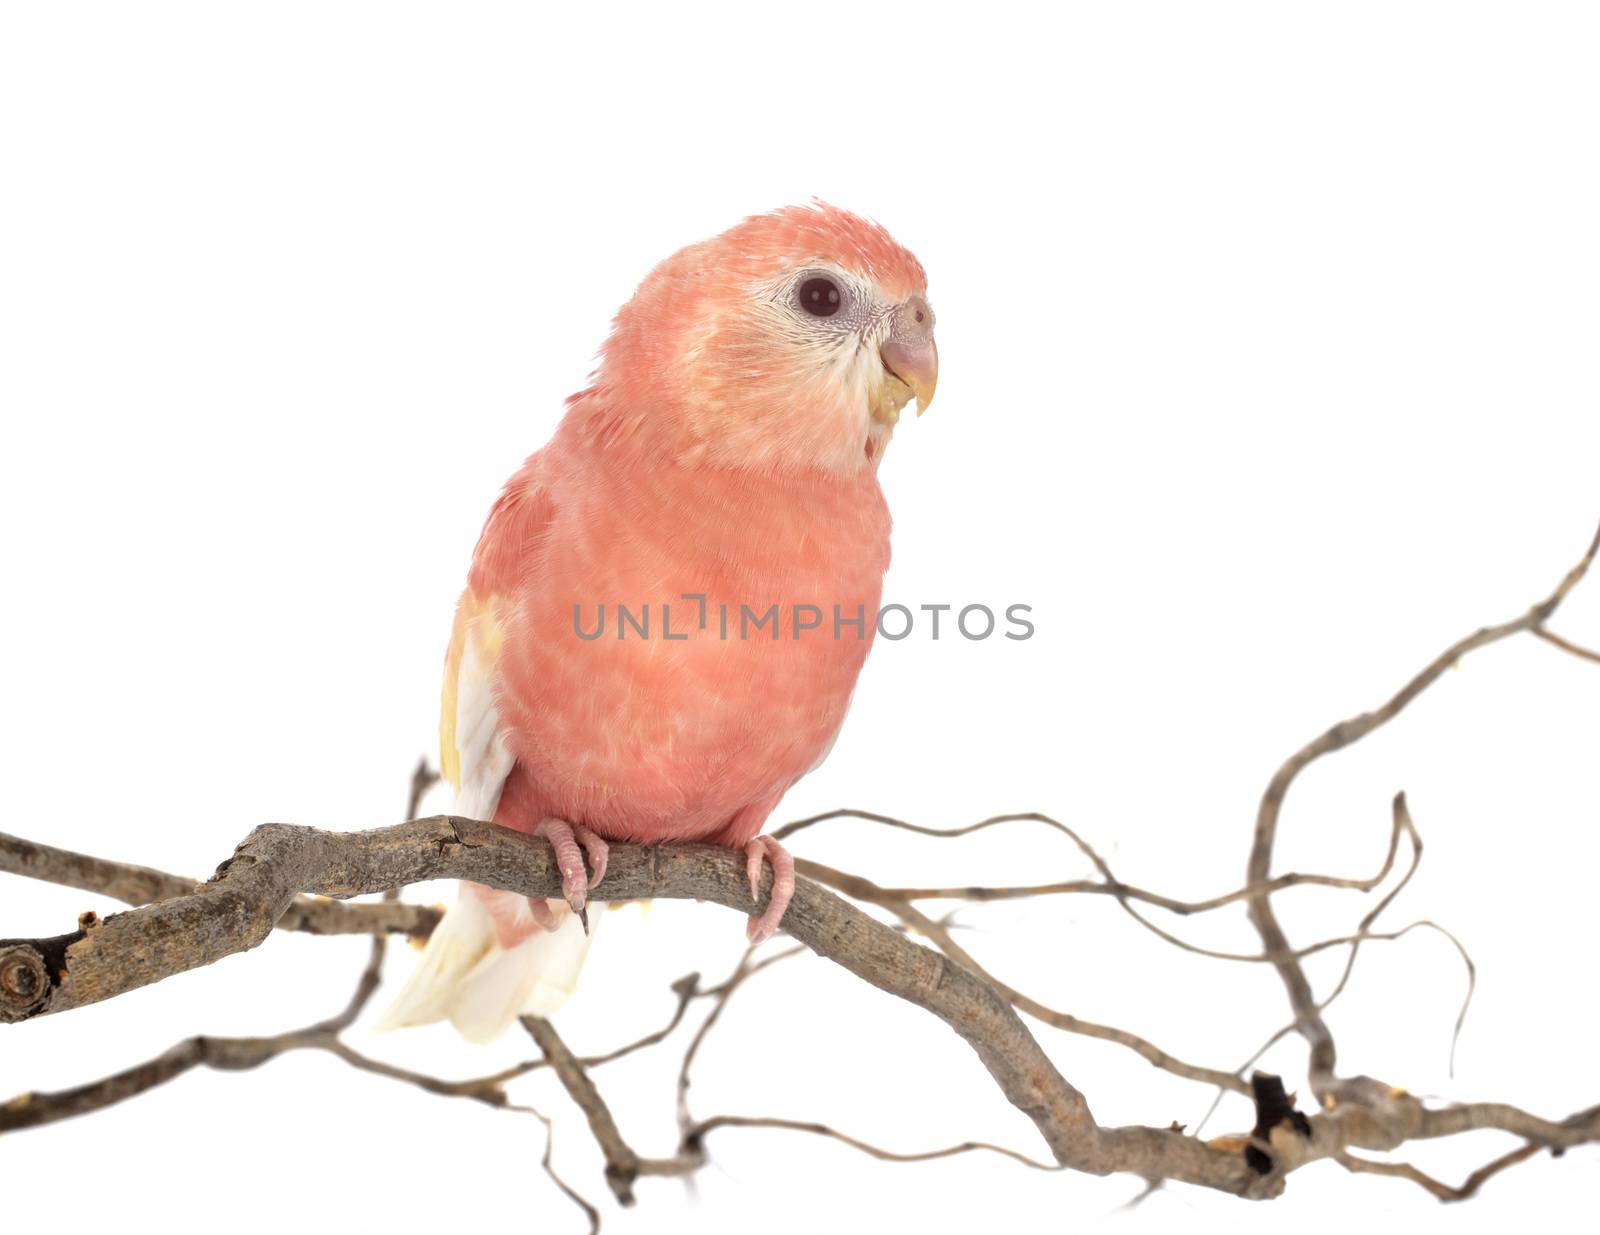 Bourke parrot in front of white background